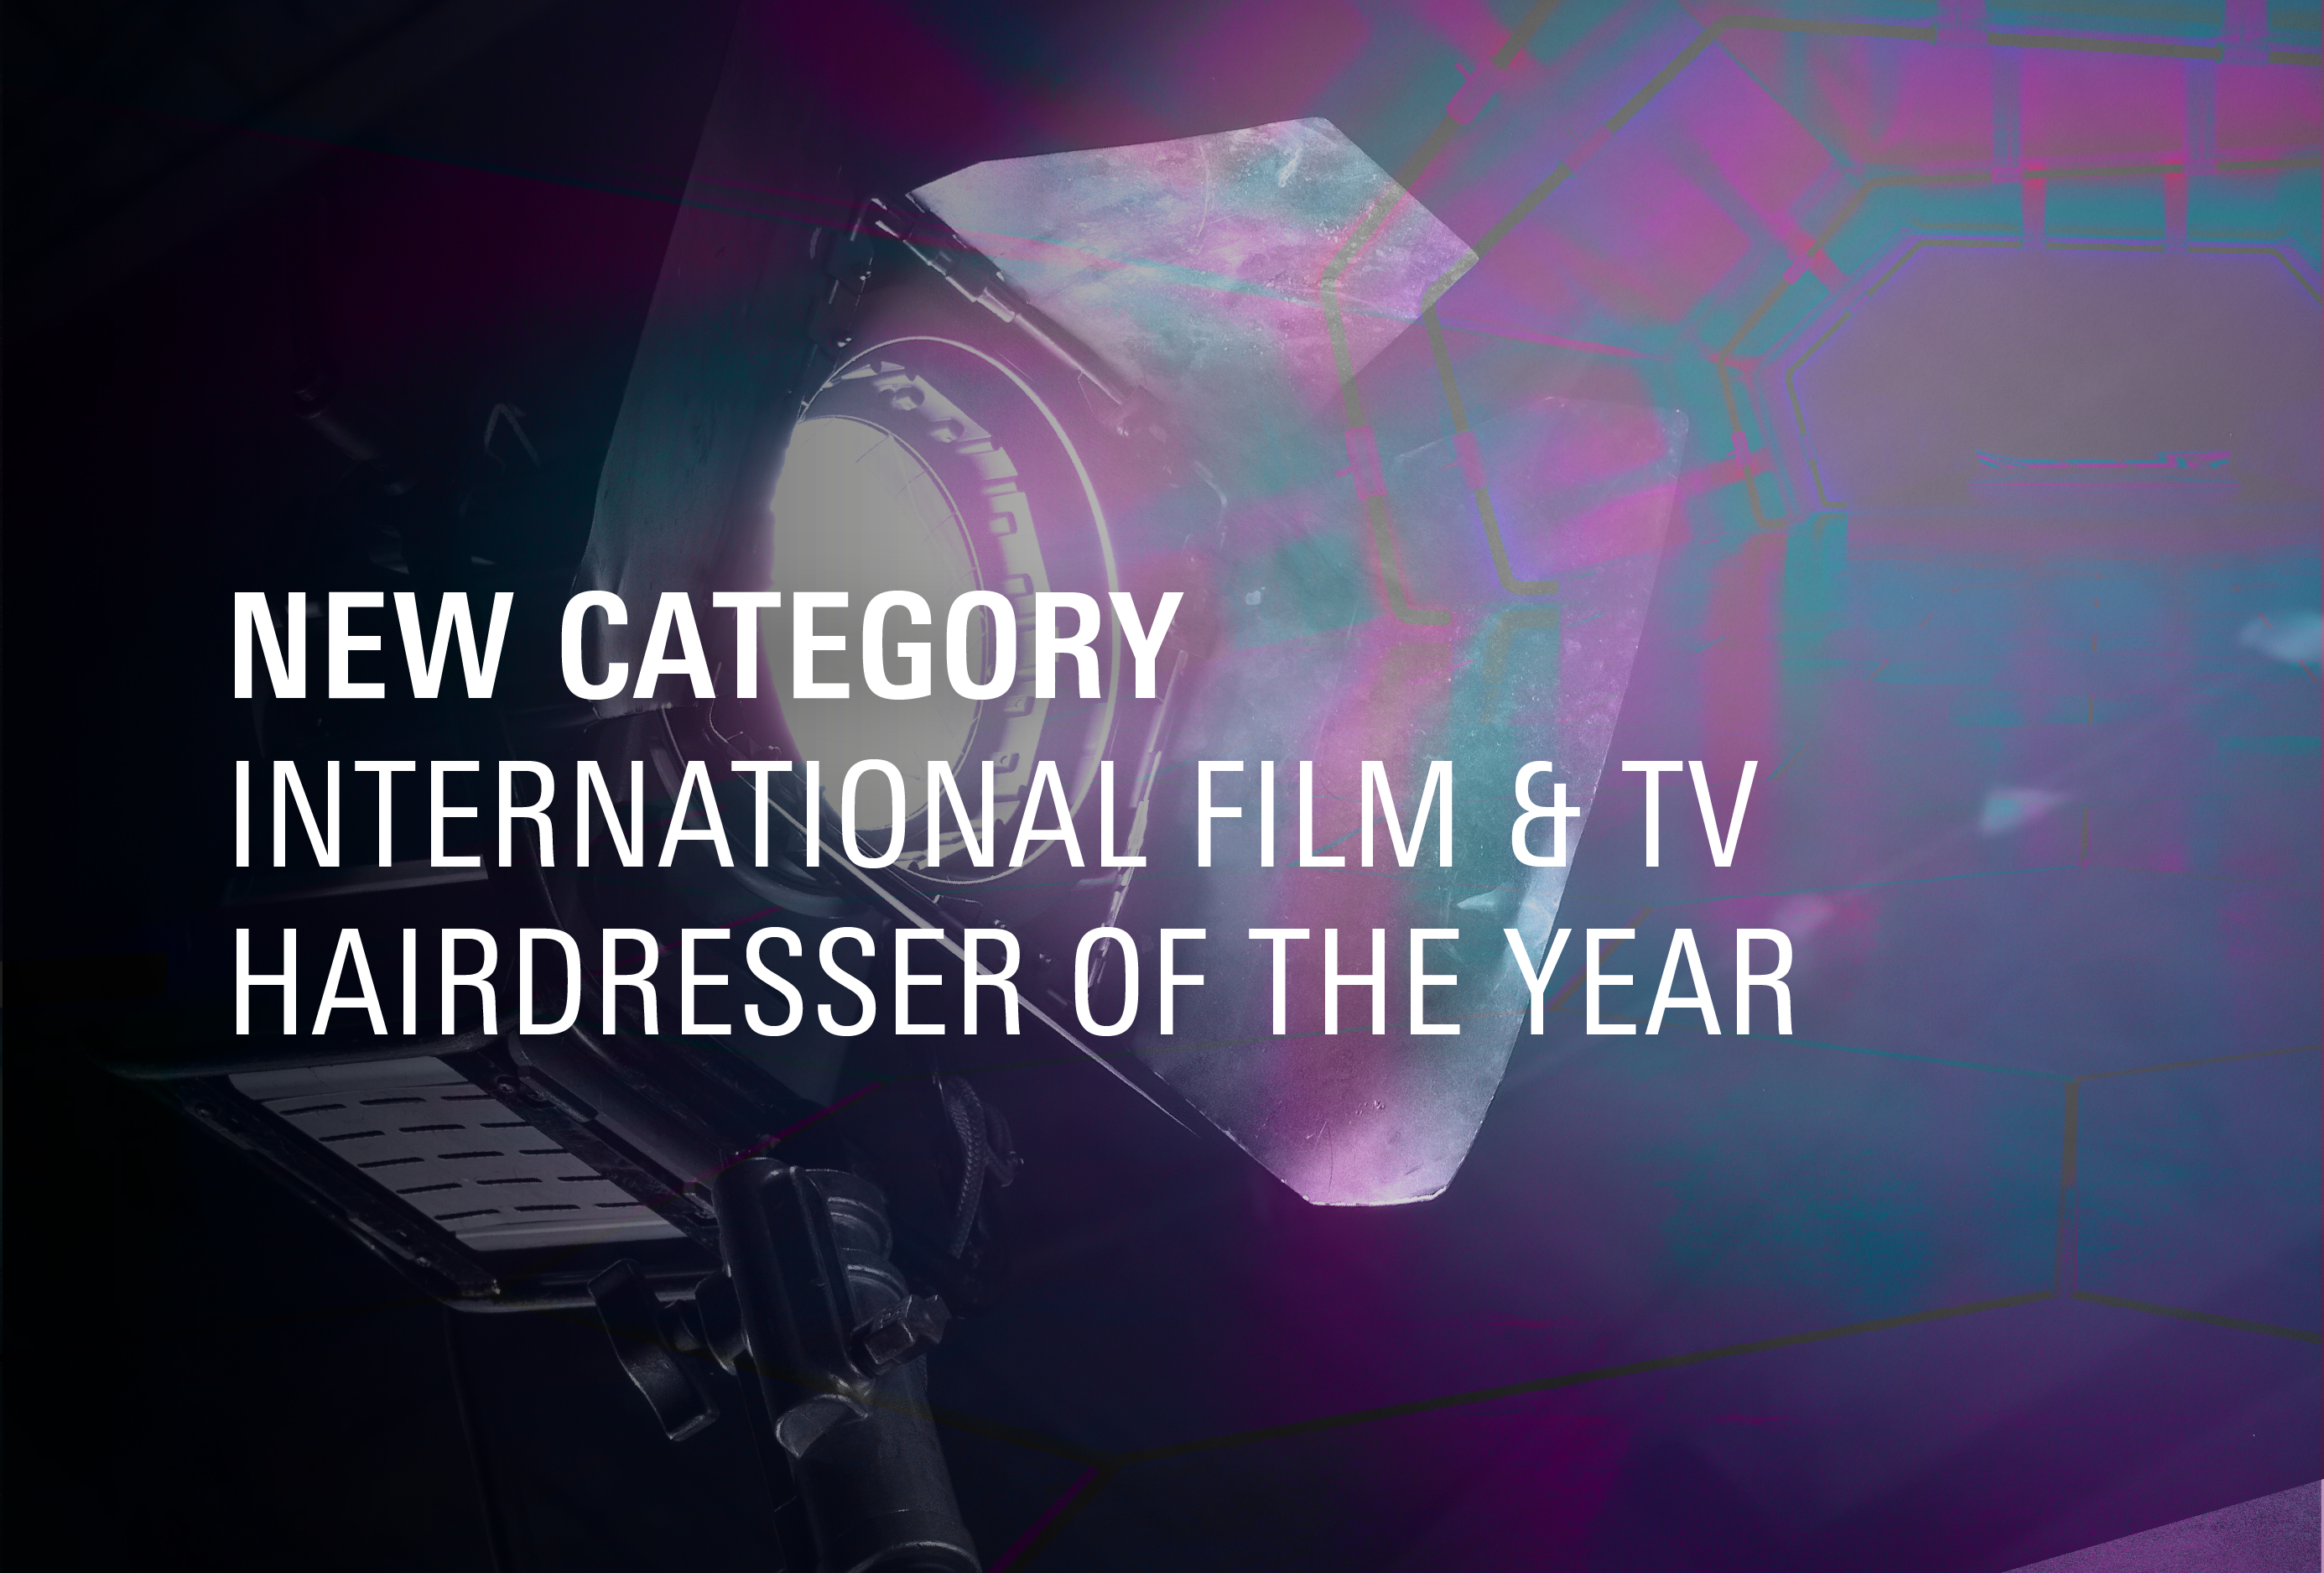 The International Hairdressing Awards present a new category of the contest: International Film & TV Hairdresser of the Year